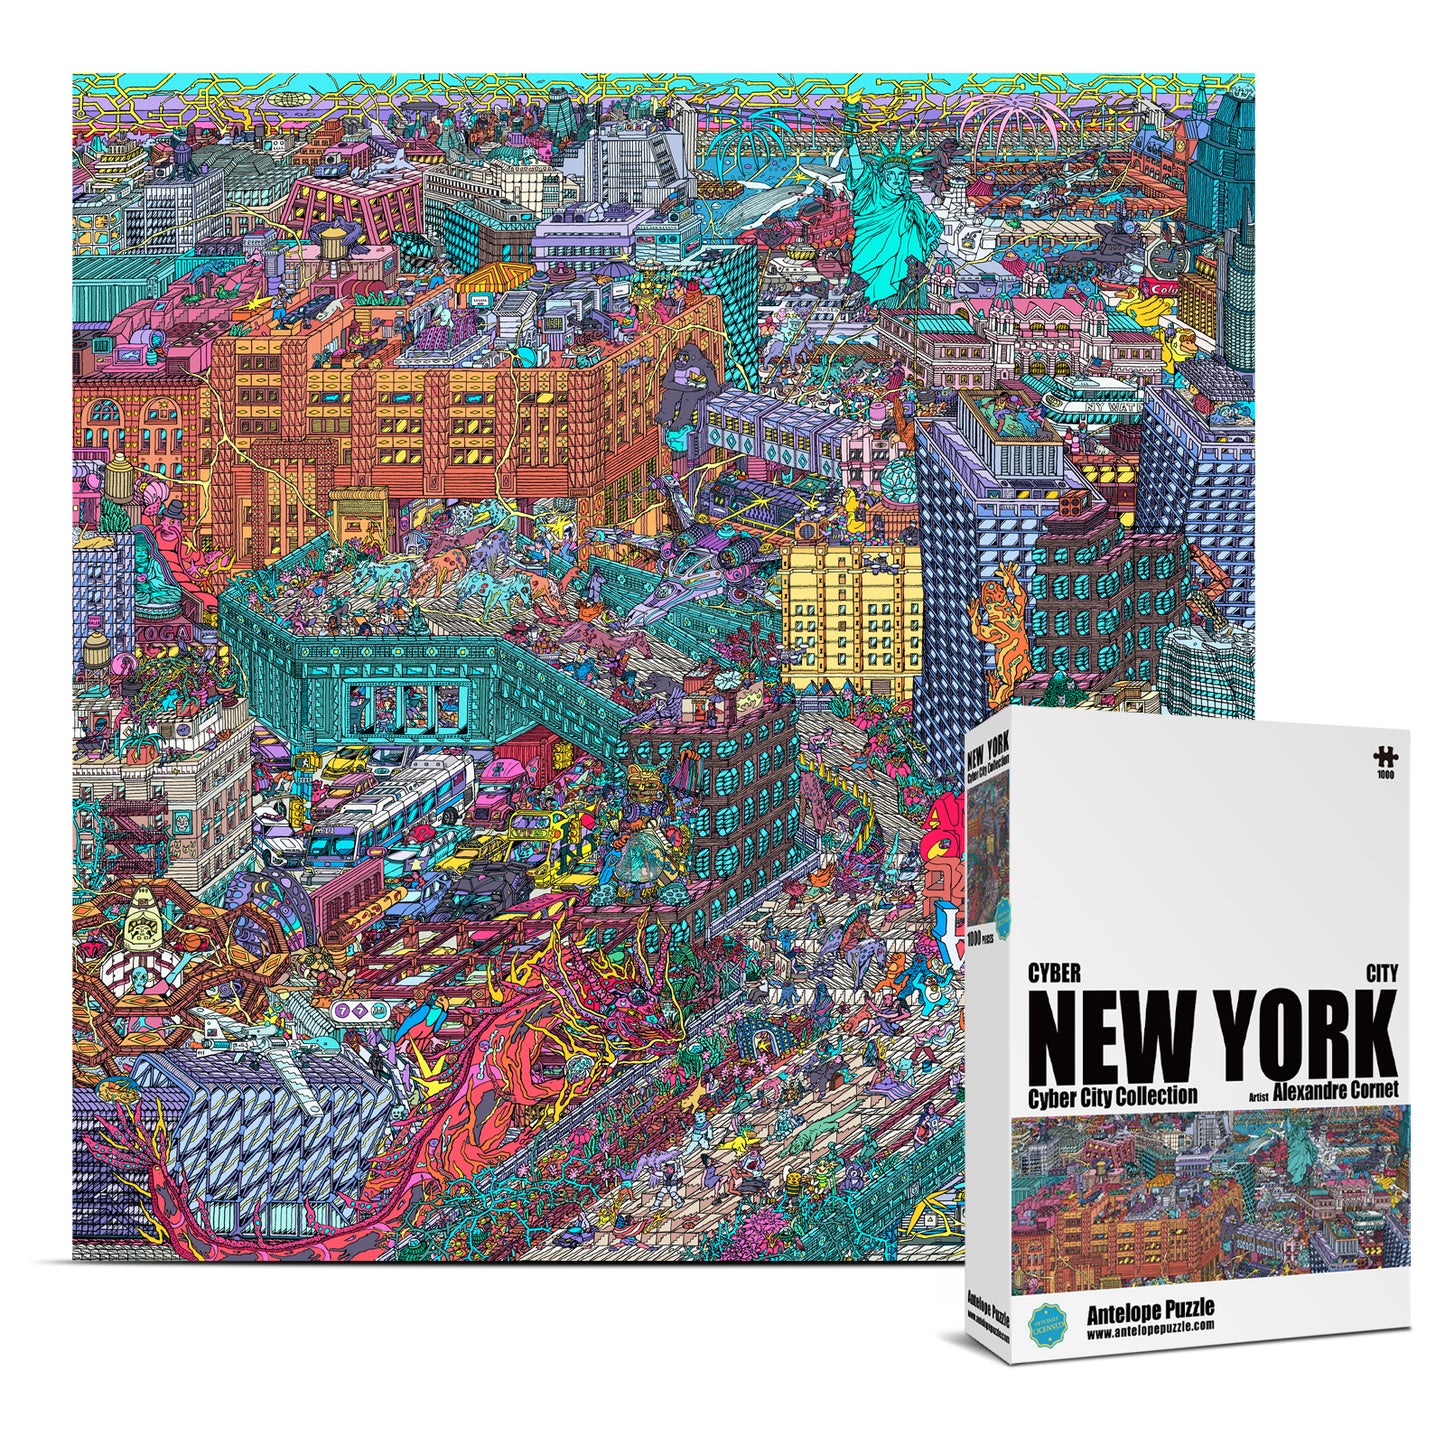 Cyber New York City-The High Line 1000 Piece Jigsaw Puzzle